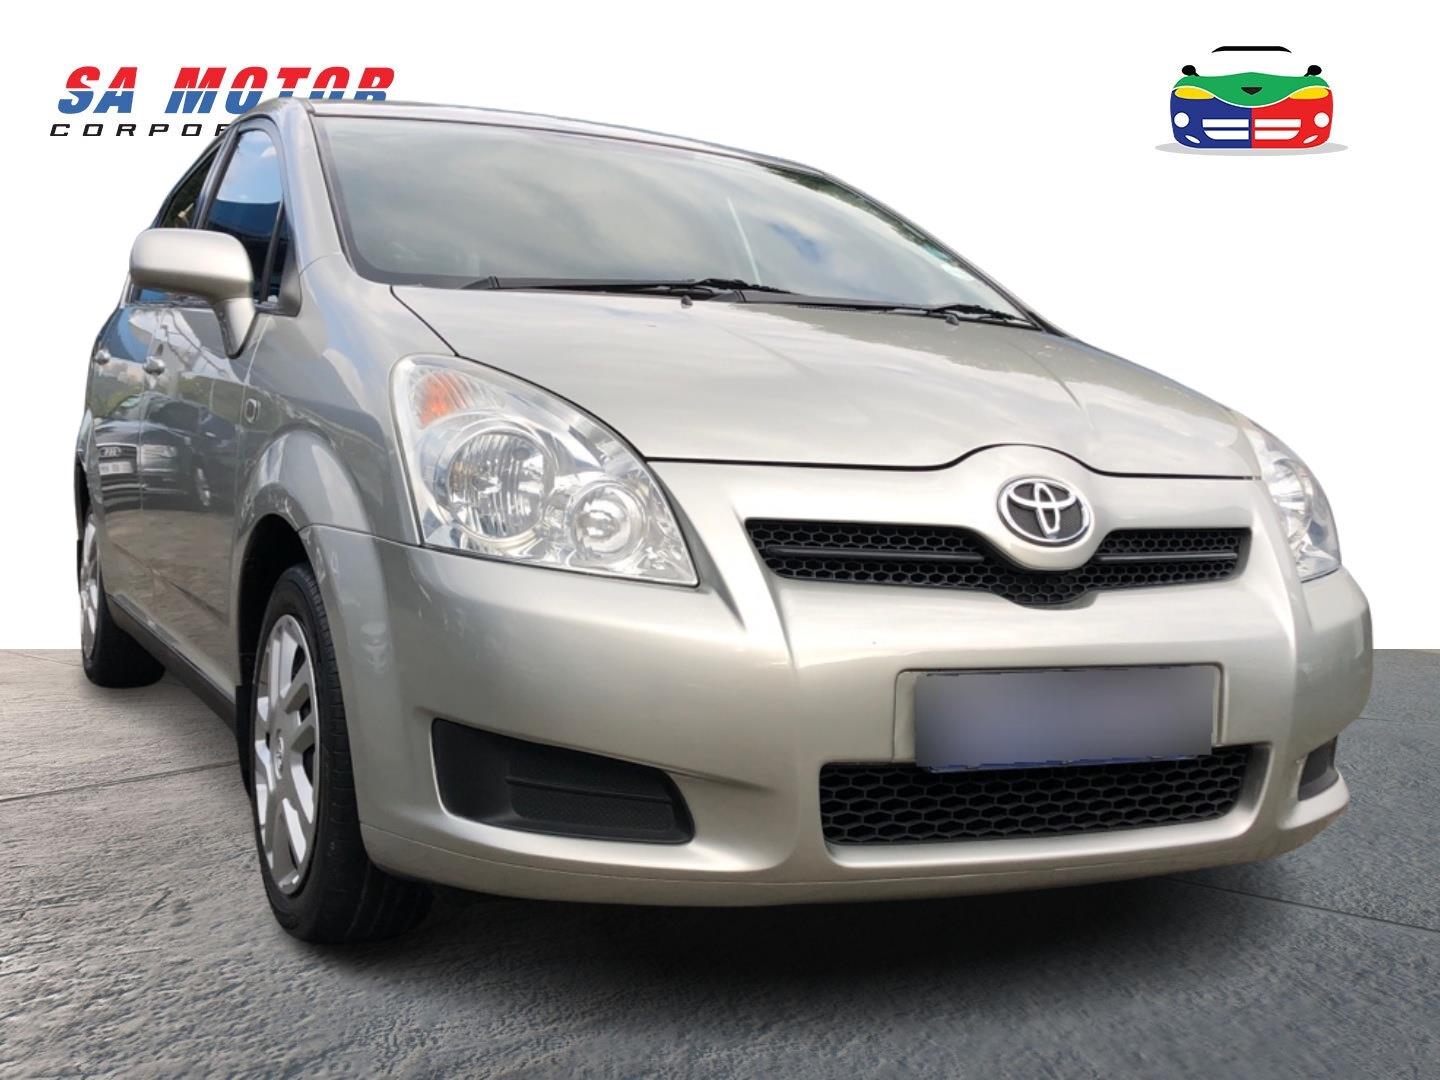 2009 Toyota Verso 160 for sale - 325843